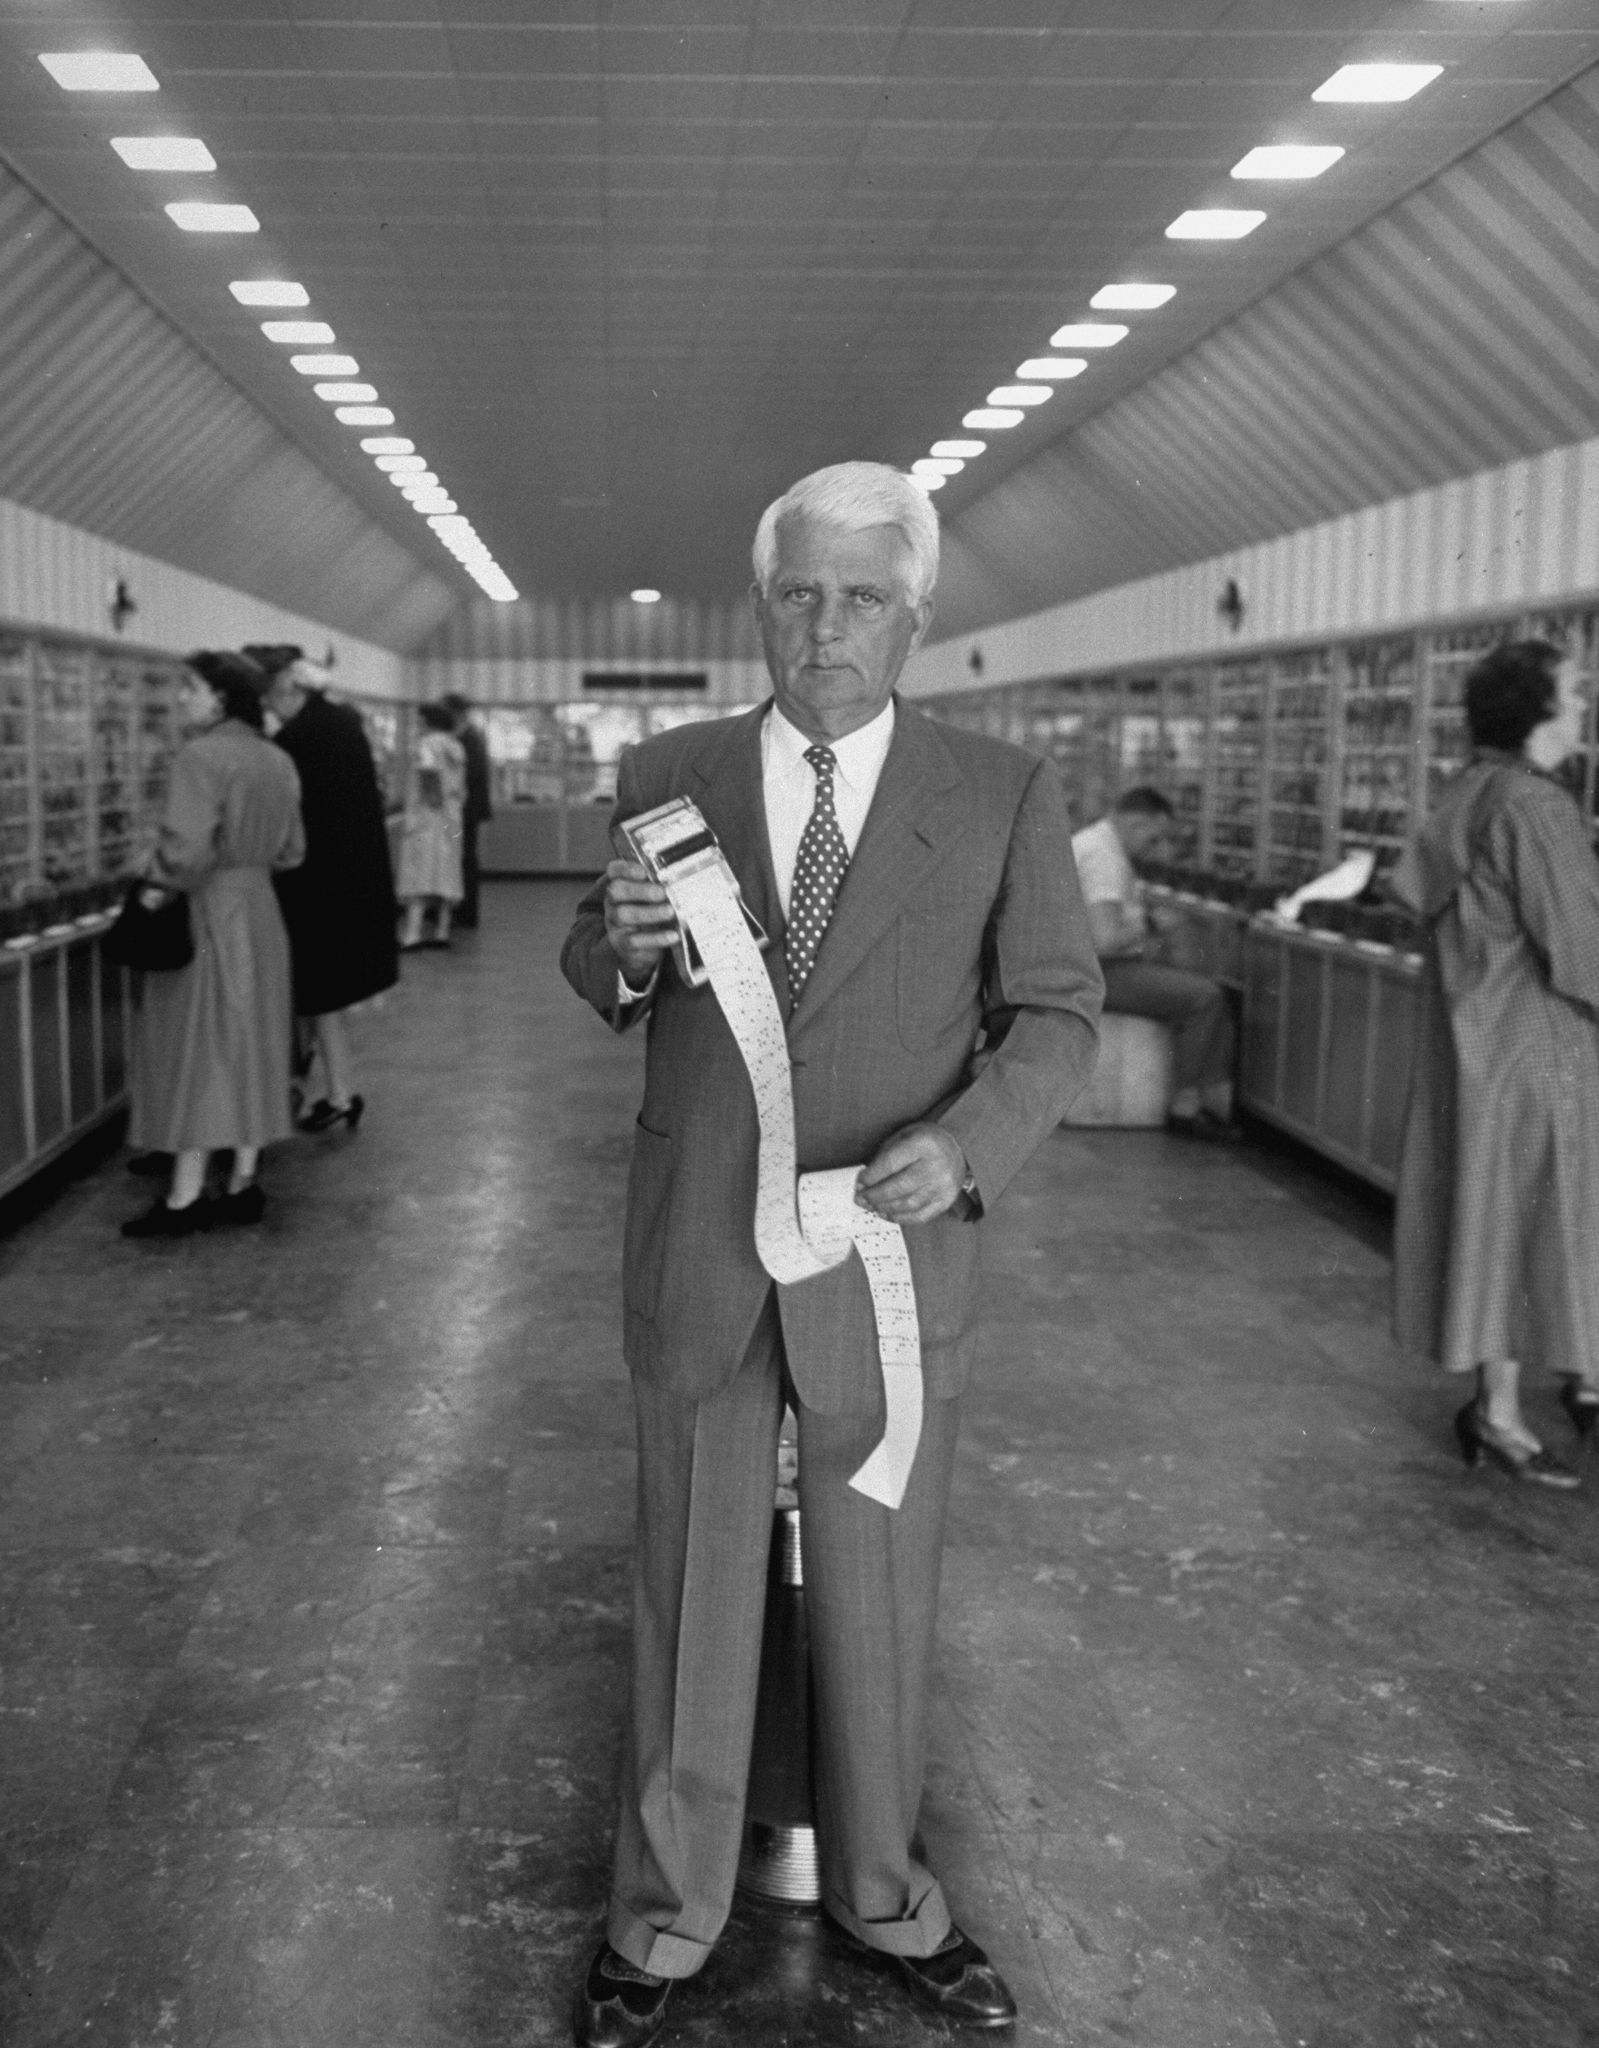 Clarence Saunders stands with the ticker-tape technology at the heart of Keedoozle, his fully automated grocery store, Memphis, Tenn., 1948.